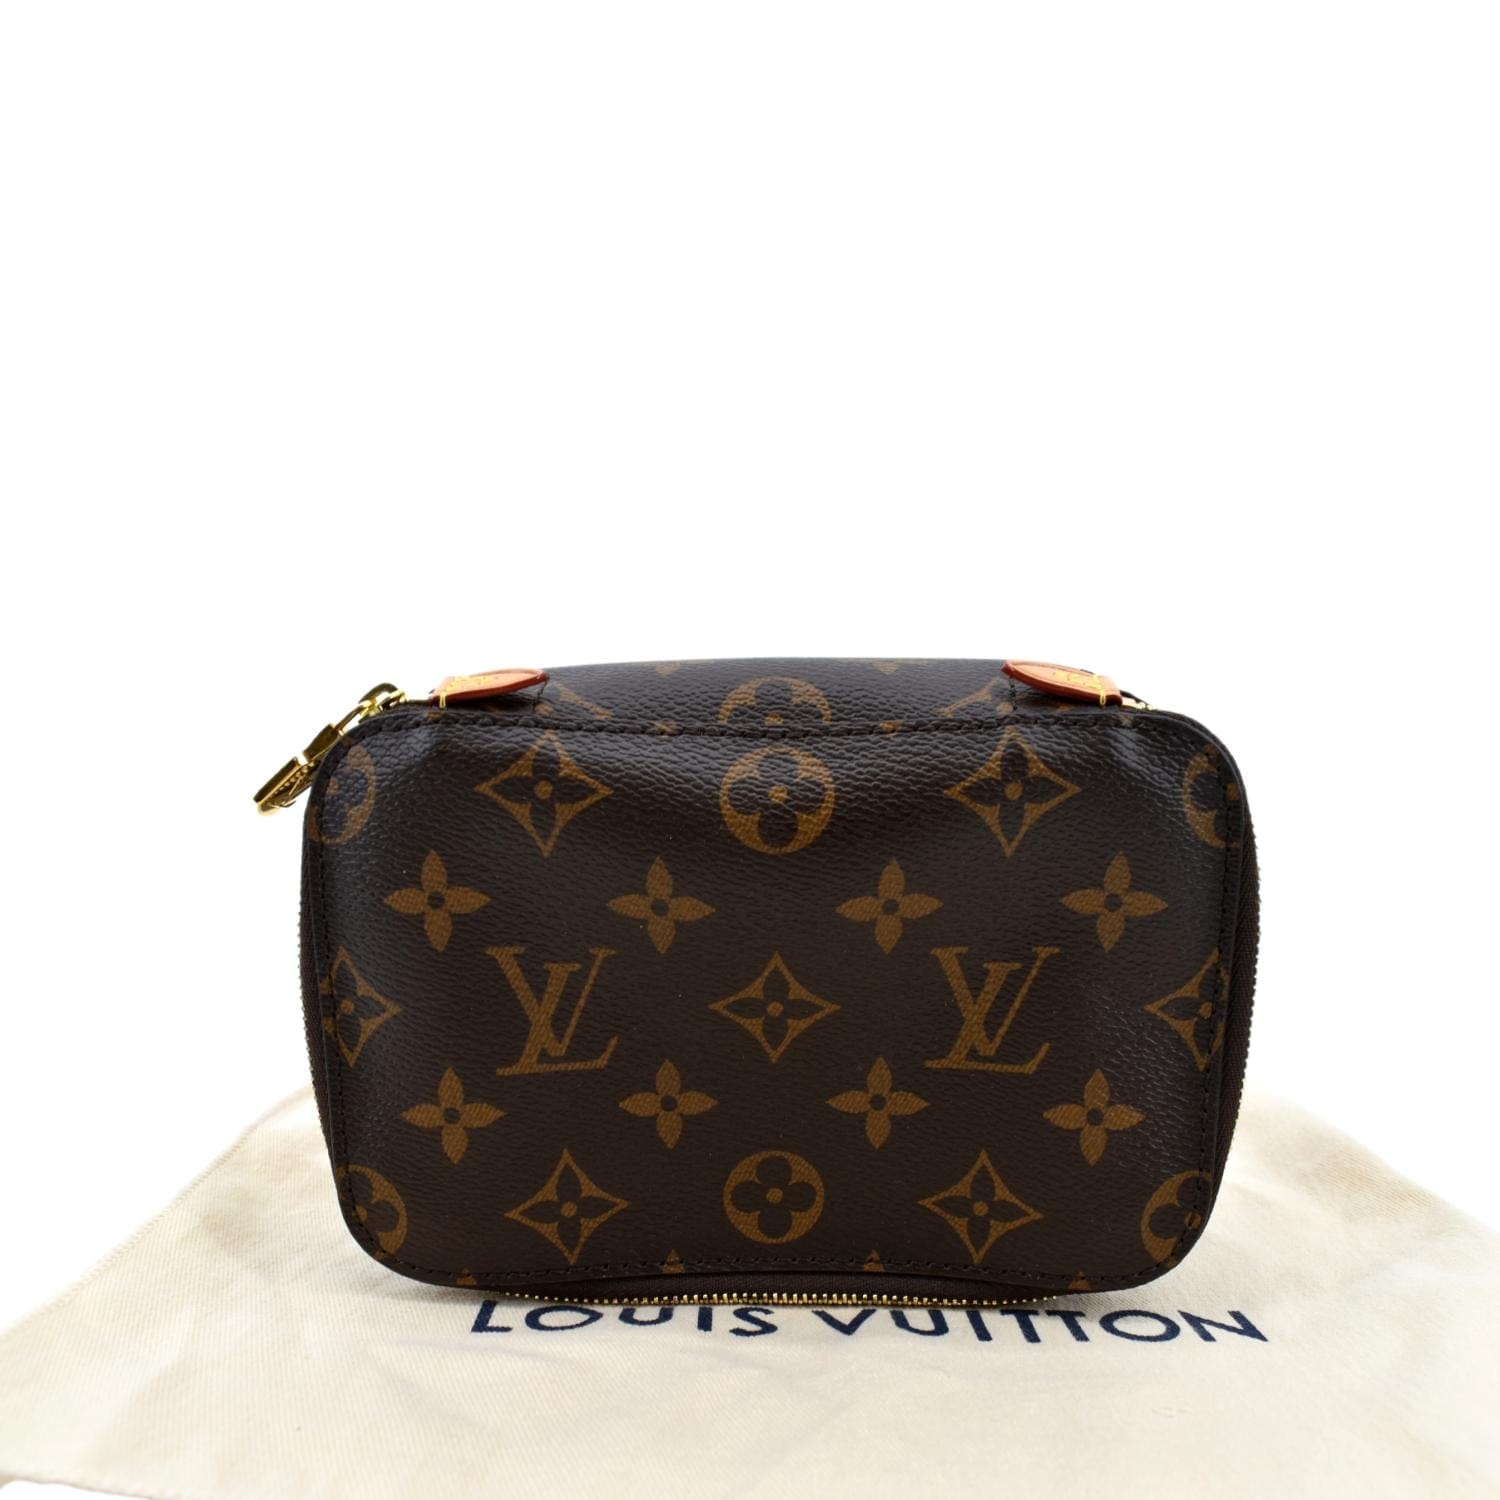 Louis Vuitton Packing Cube Pm In Black